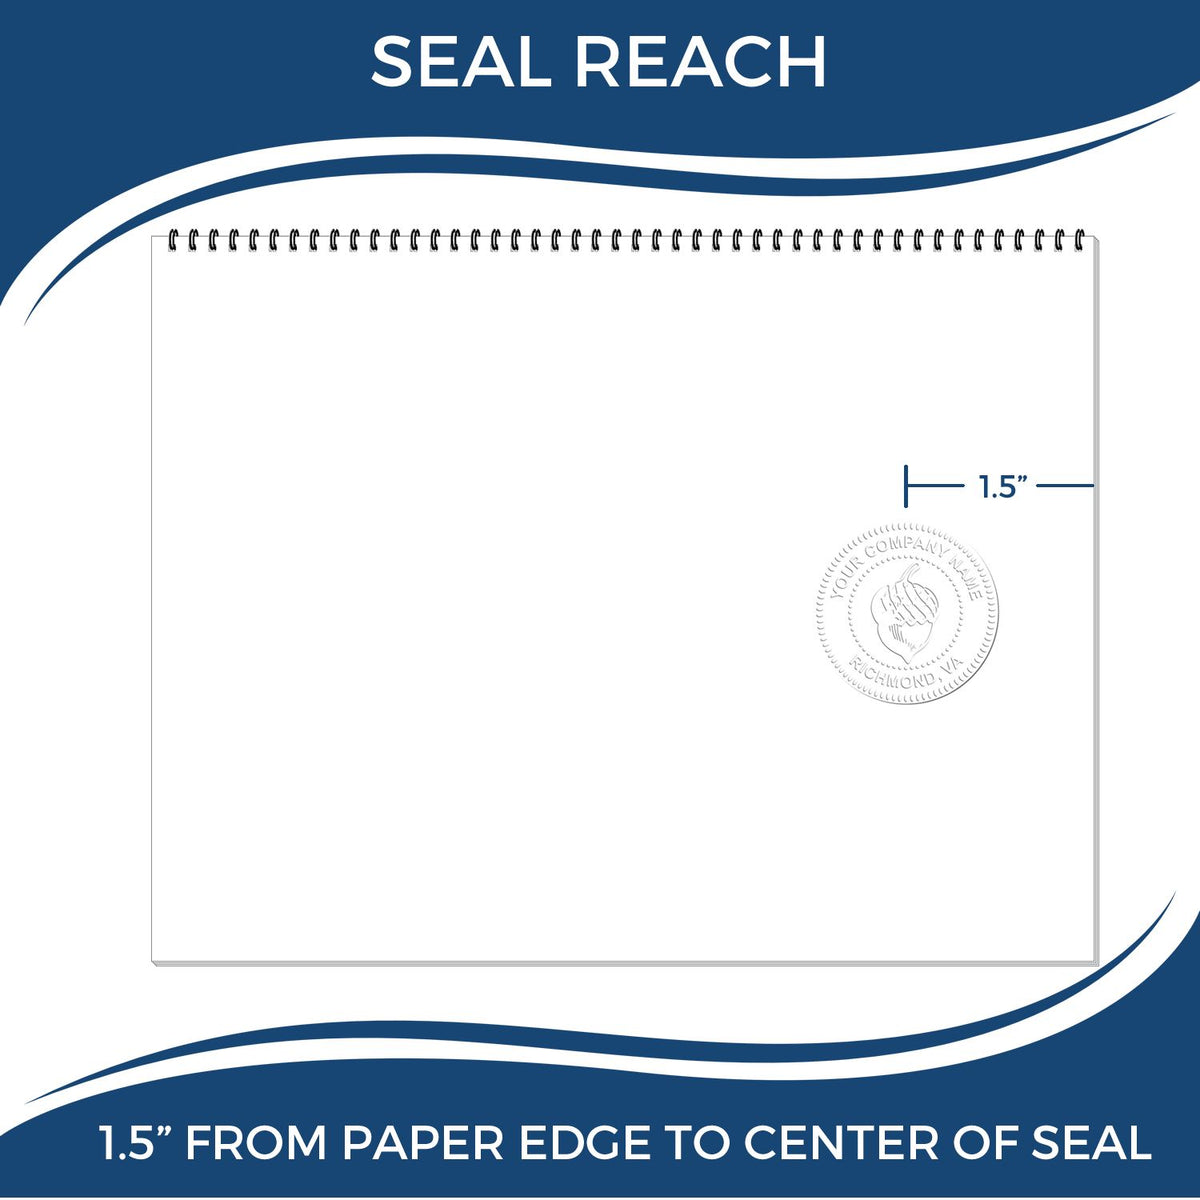 An infographic showing the seal reach which is represented by a ruler and a miniature seal image of the Gift Missouri Geologist Seal